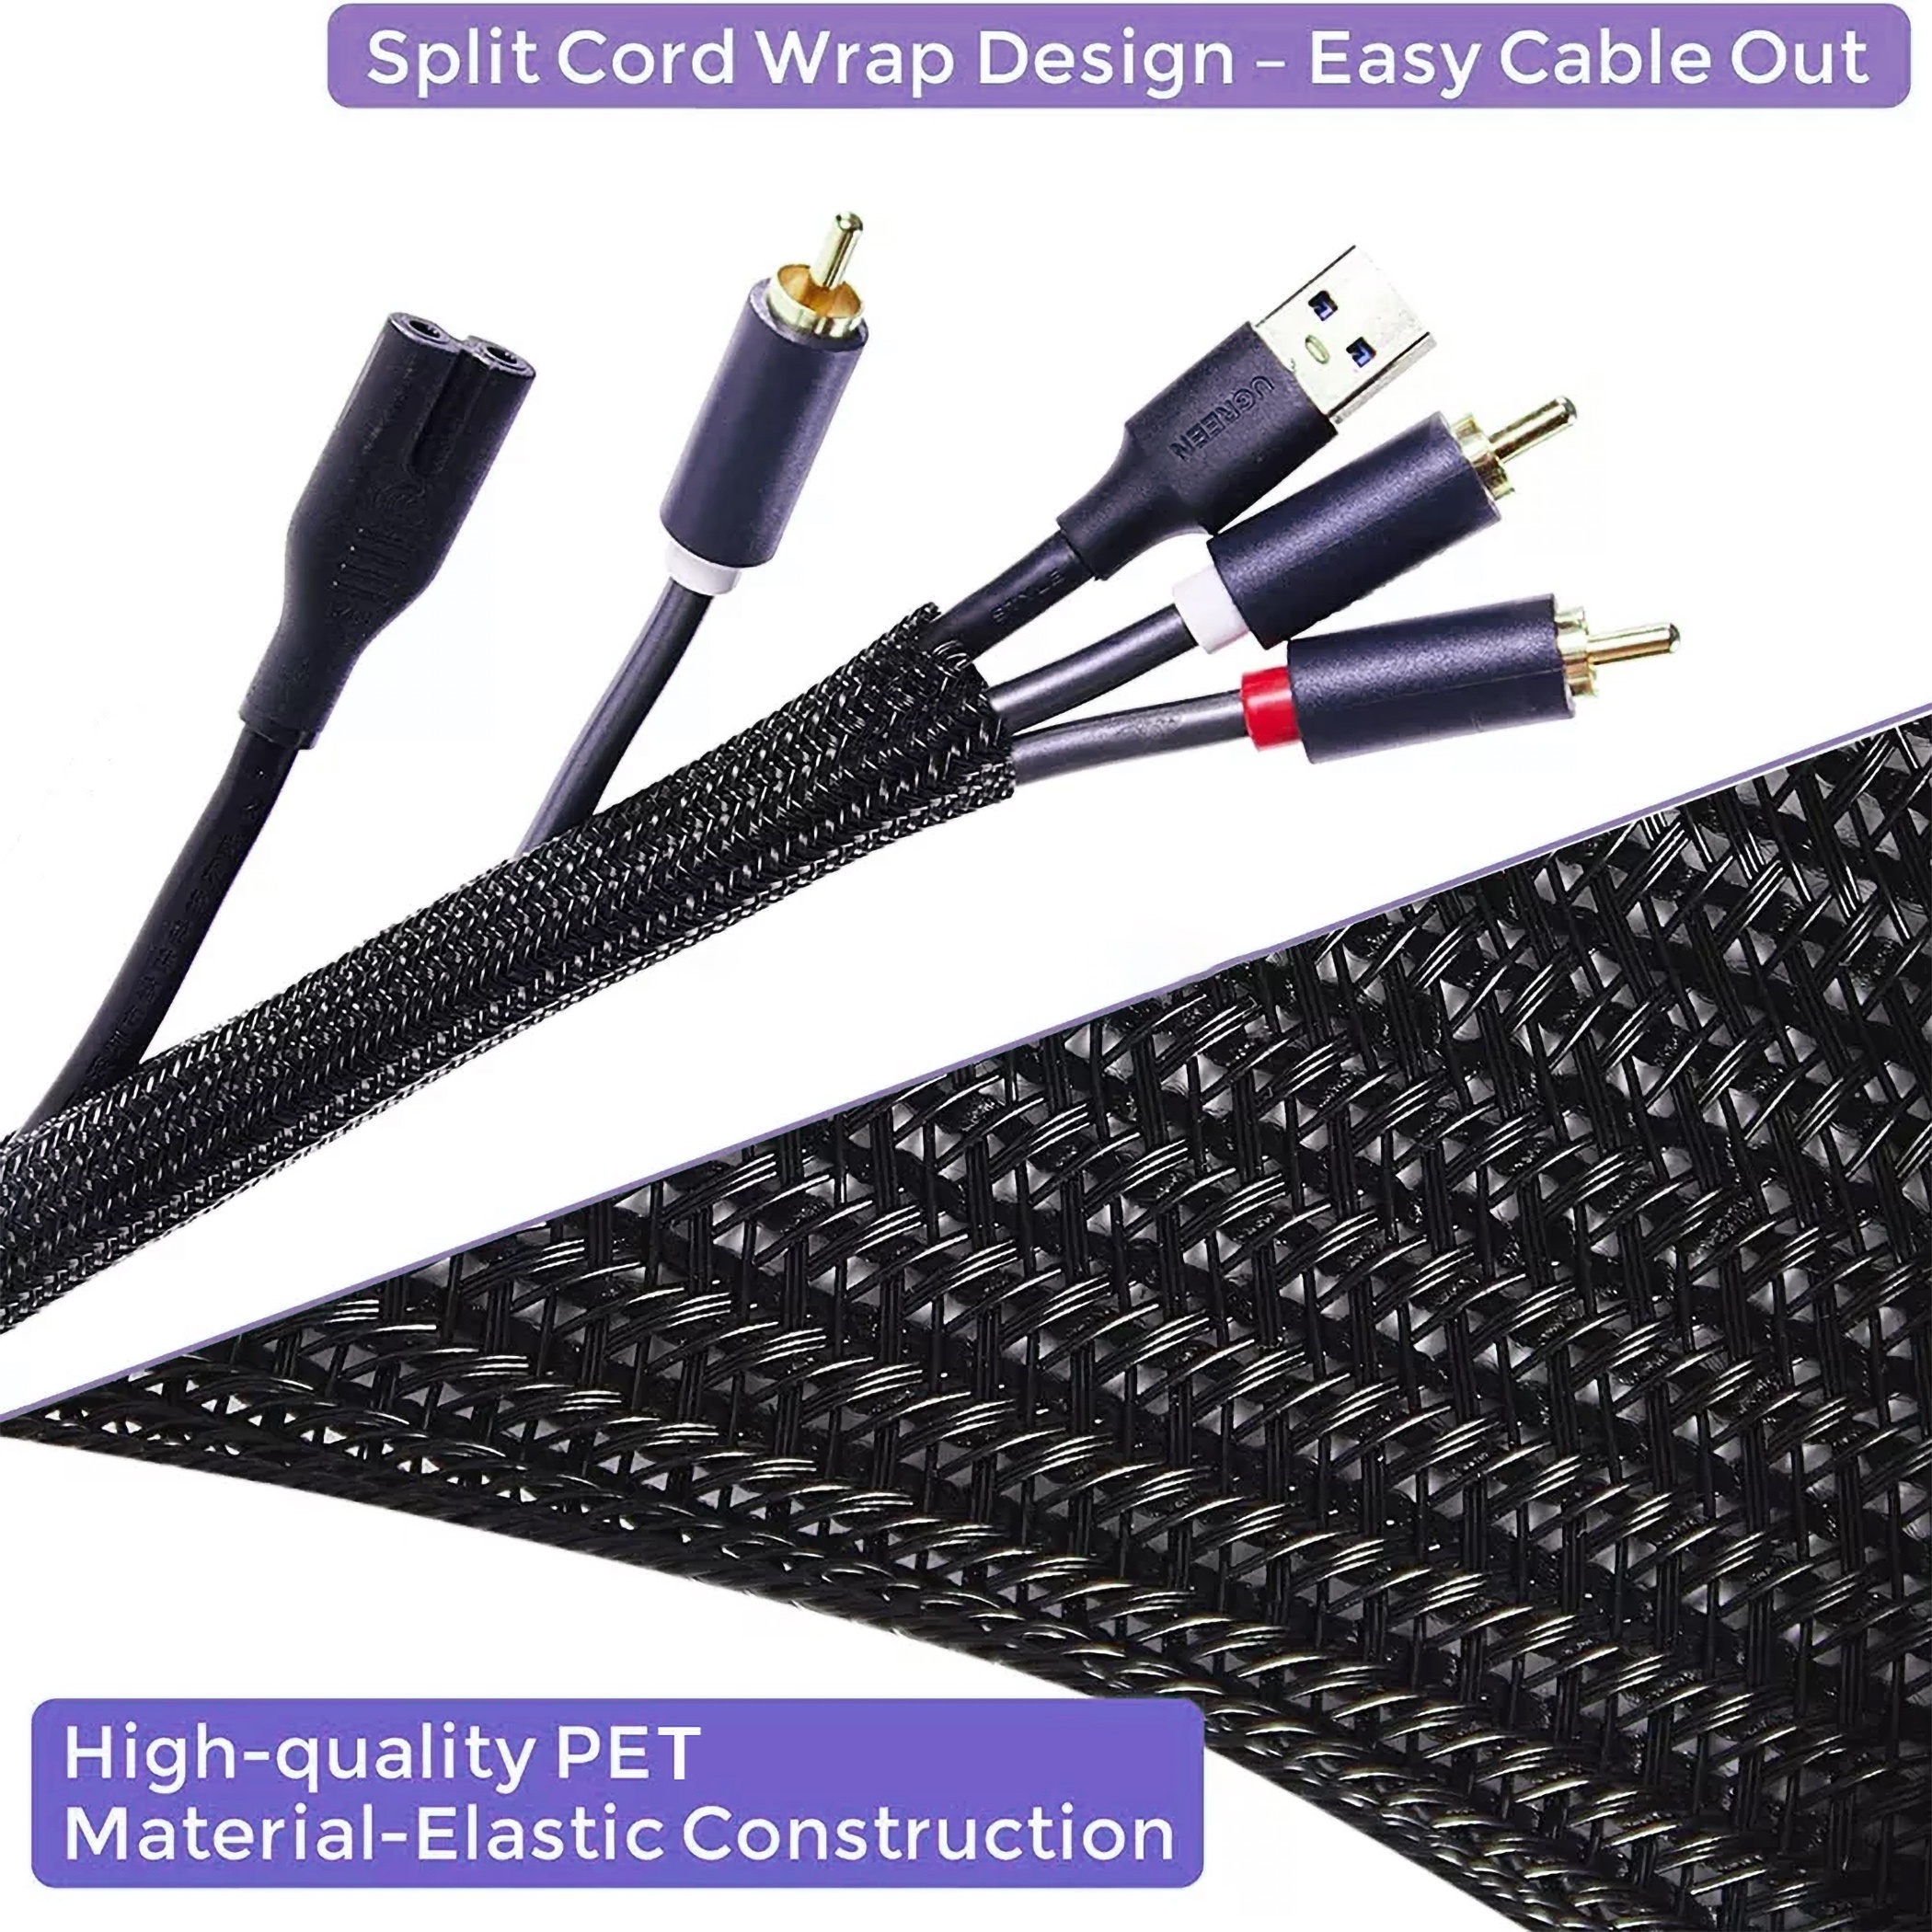 1''Cord Protector Split Wire Loom Braided Cable Sleeve,Management